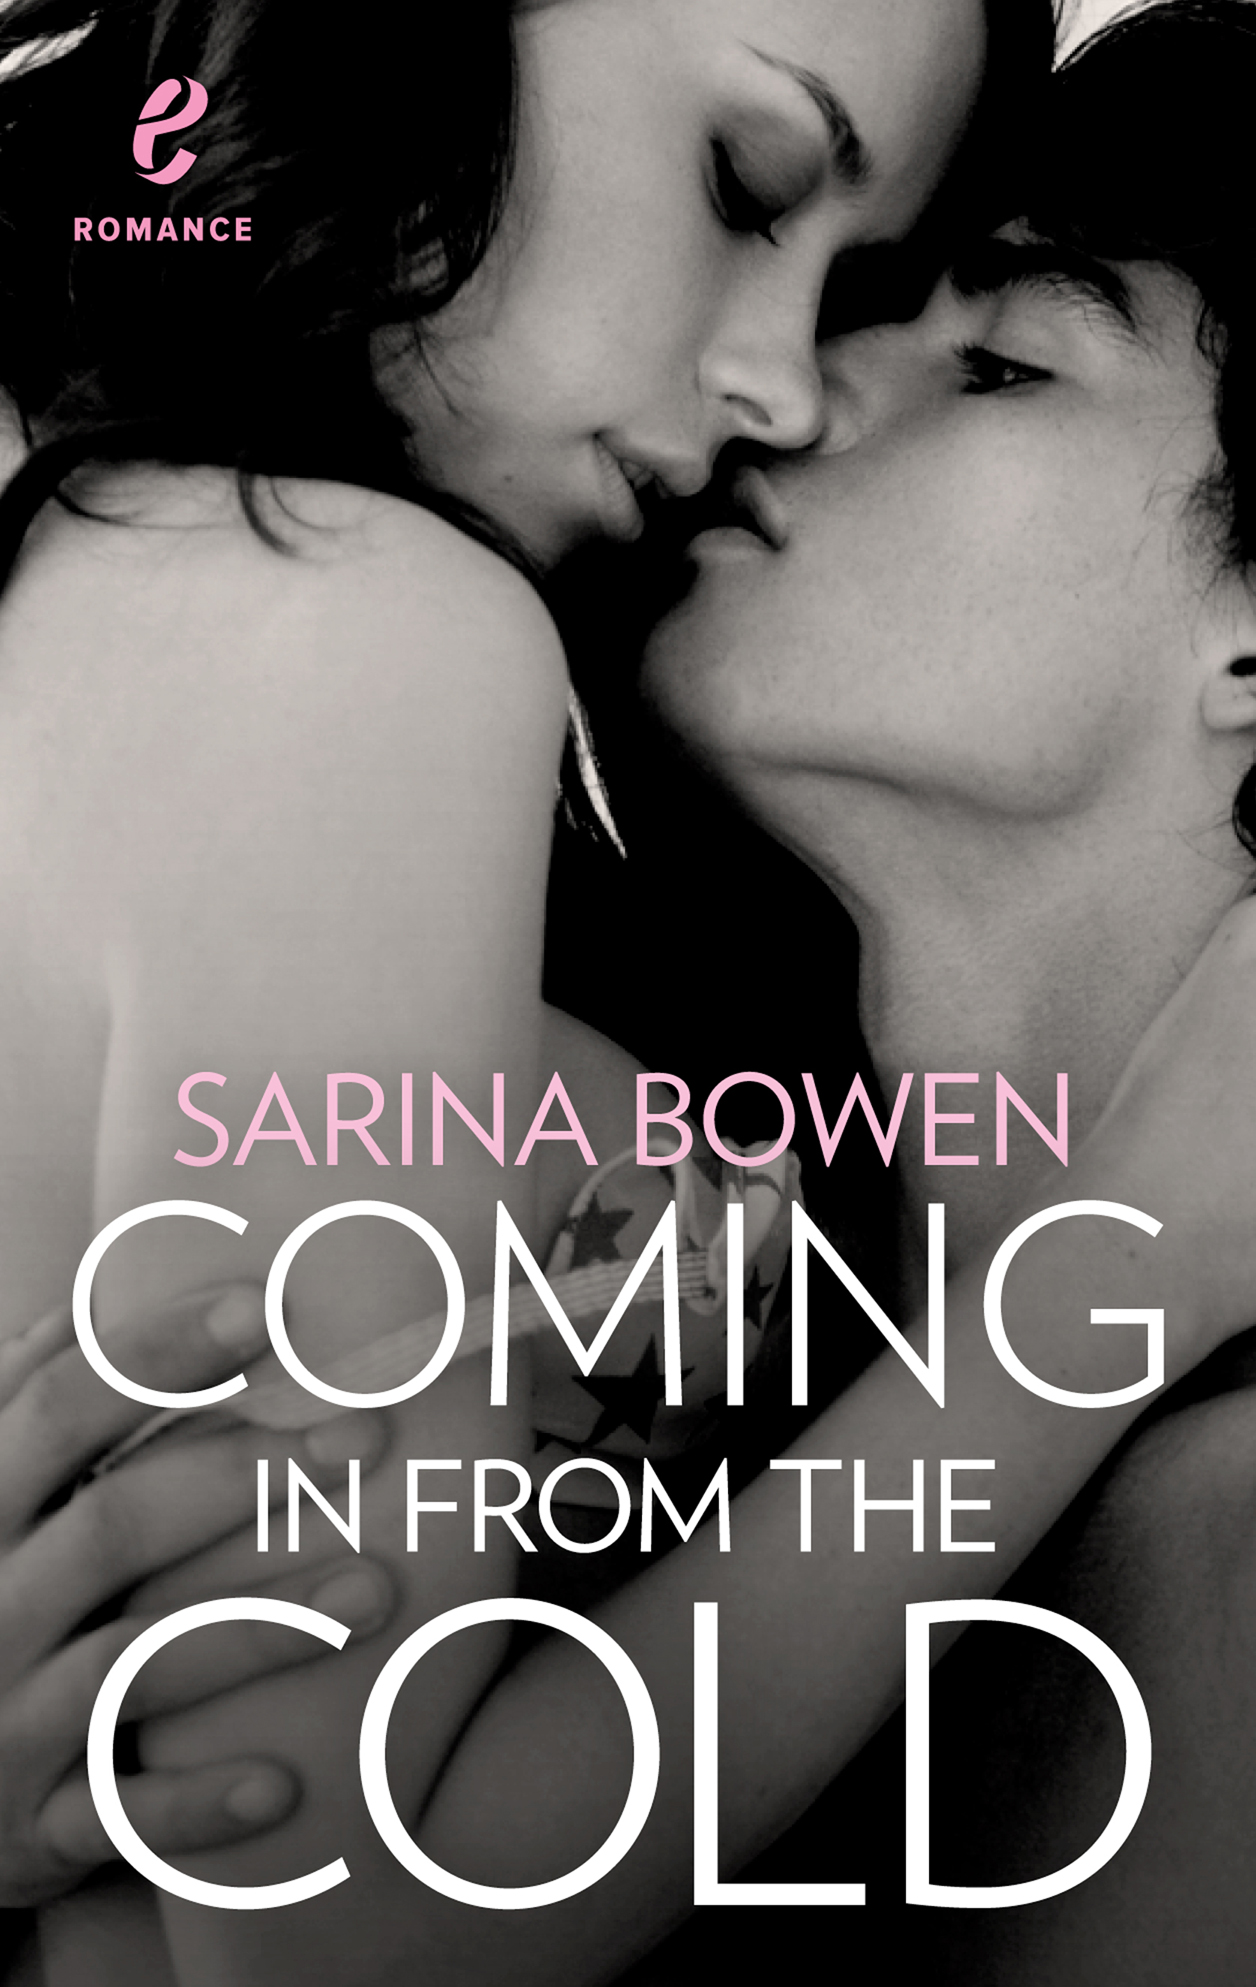 Coming in from the Cold (2014) by Sarina Bowen